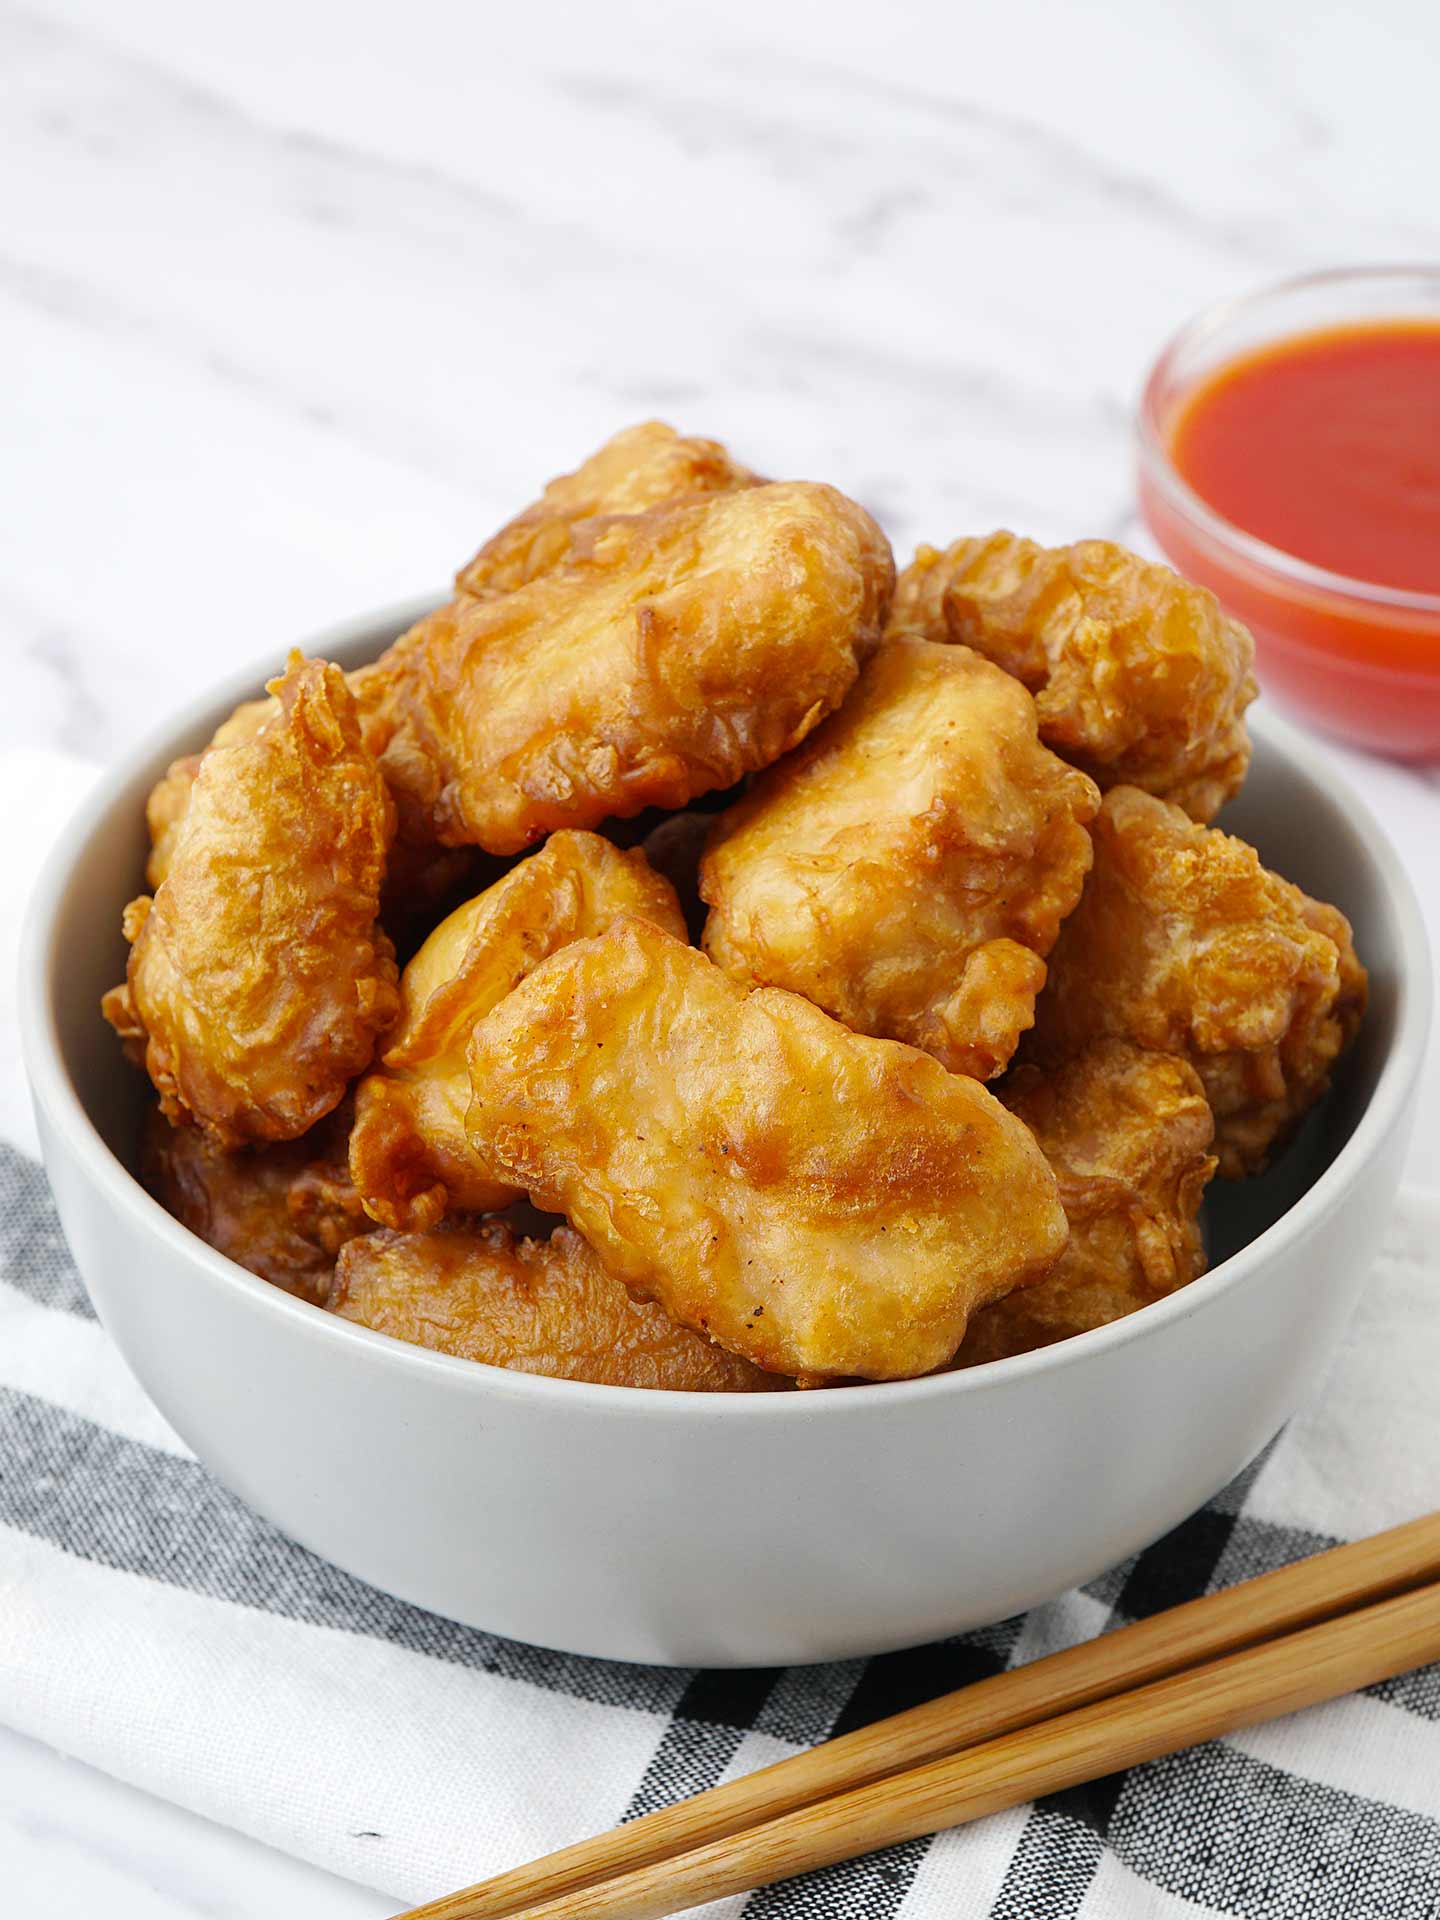 CHINESE FRIED CHICKEN